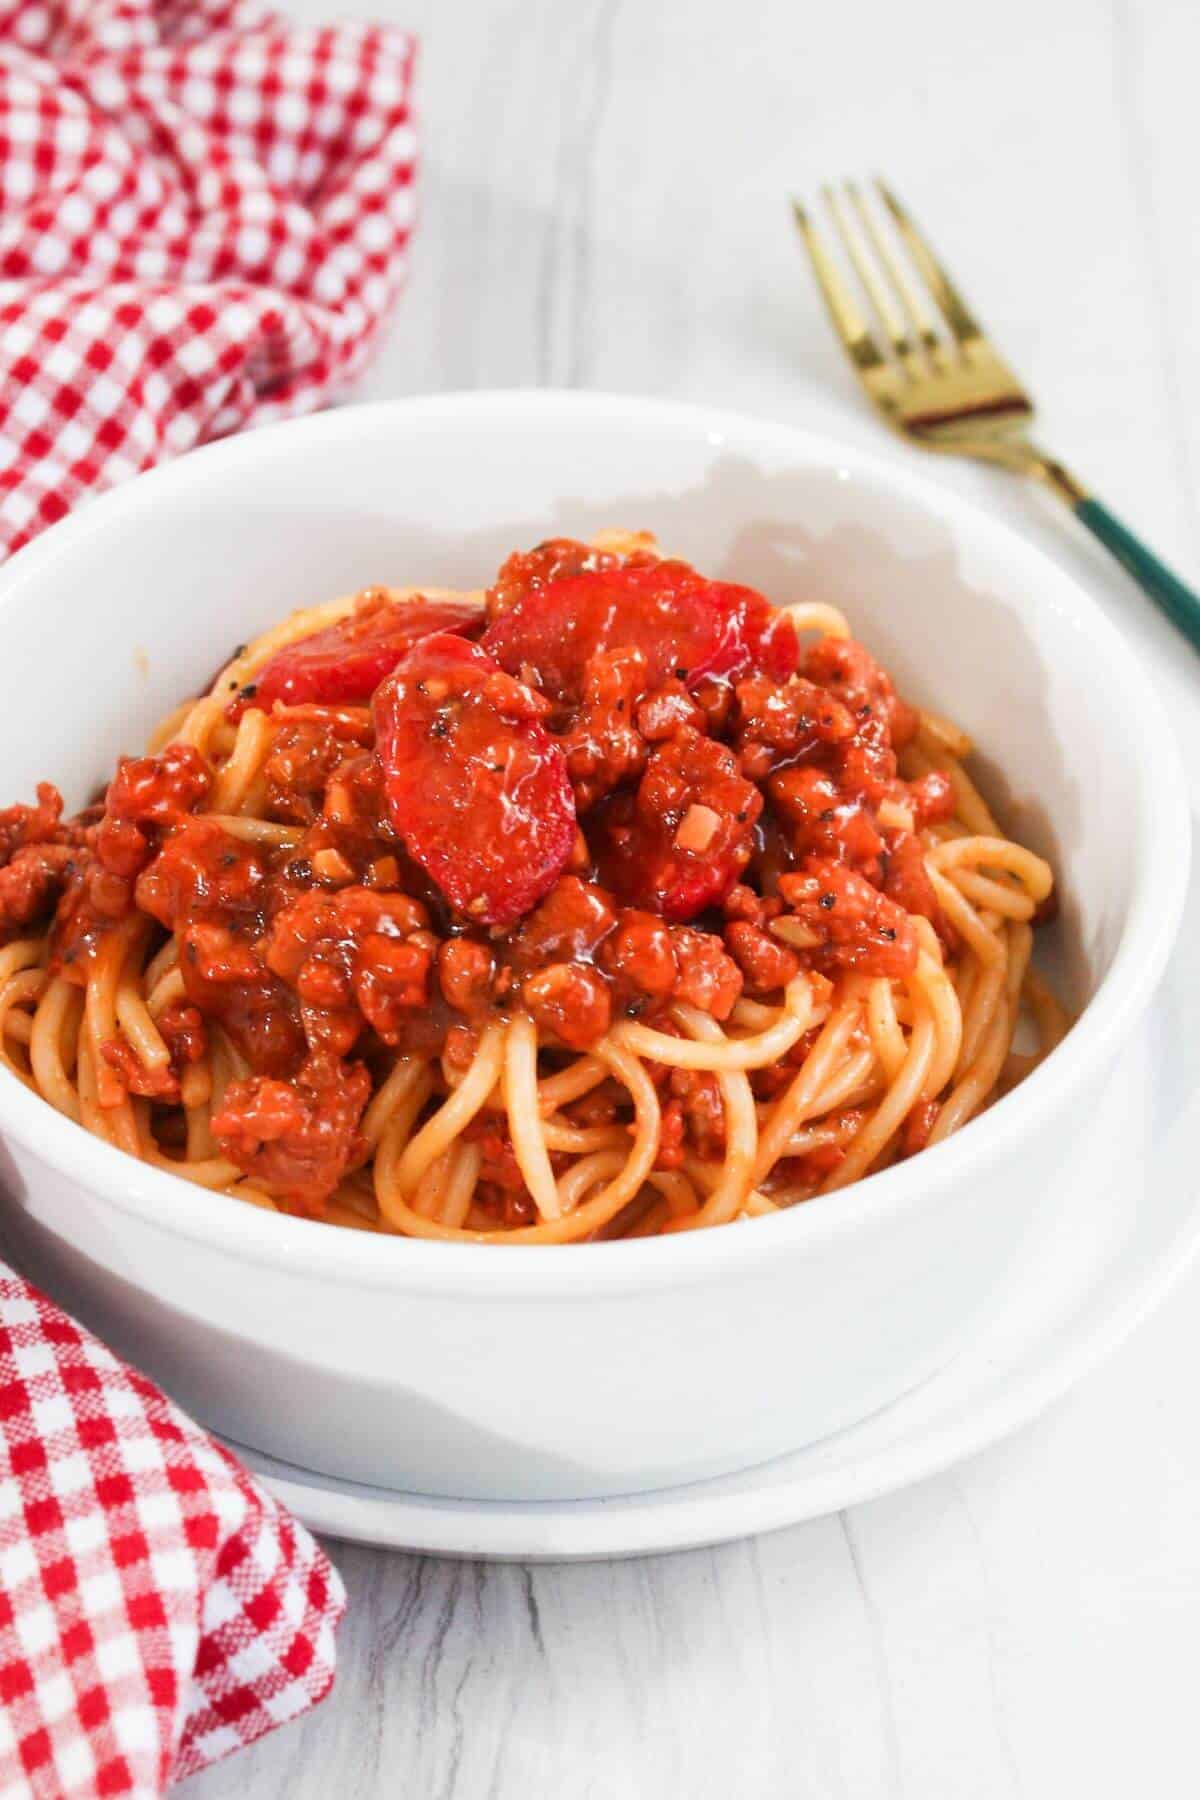 A bowl of spaghetti with meat sauce and tomatoes.